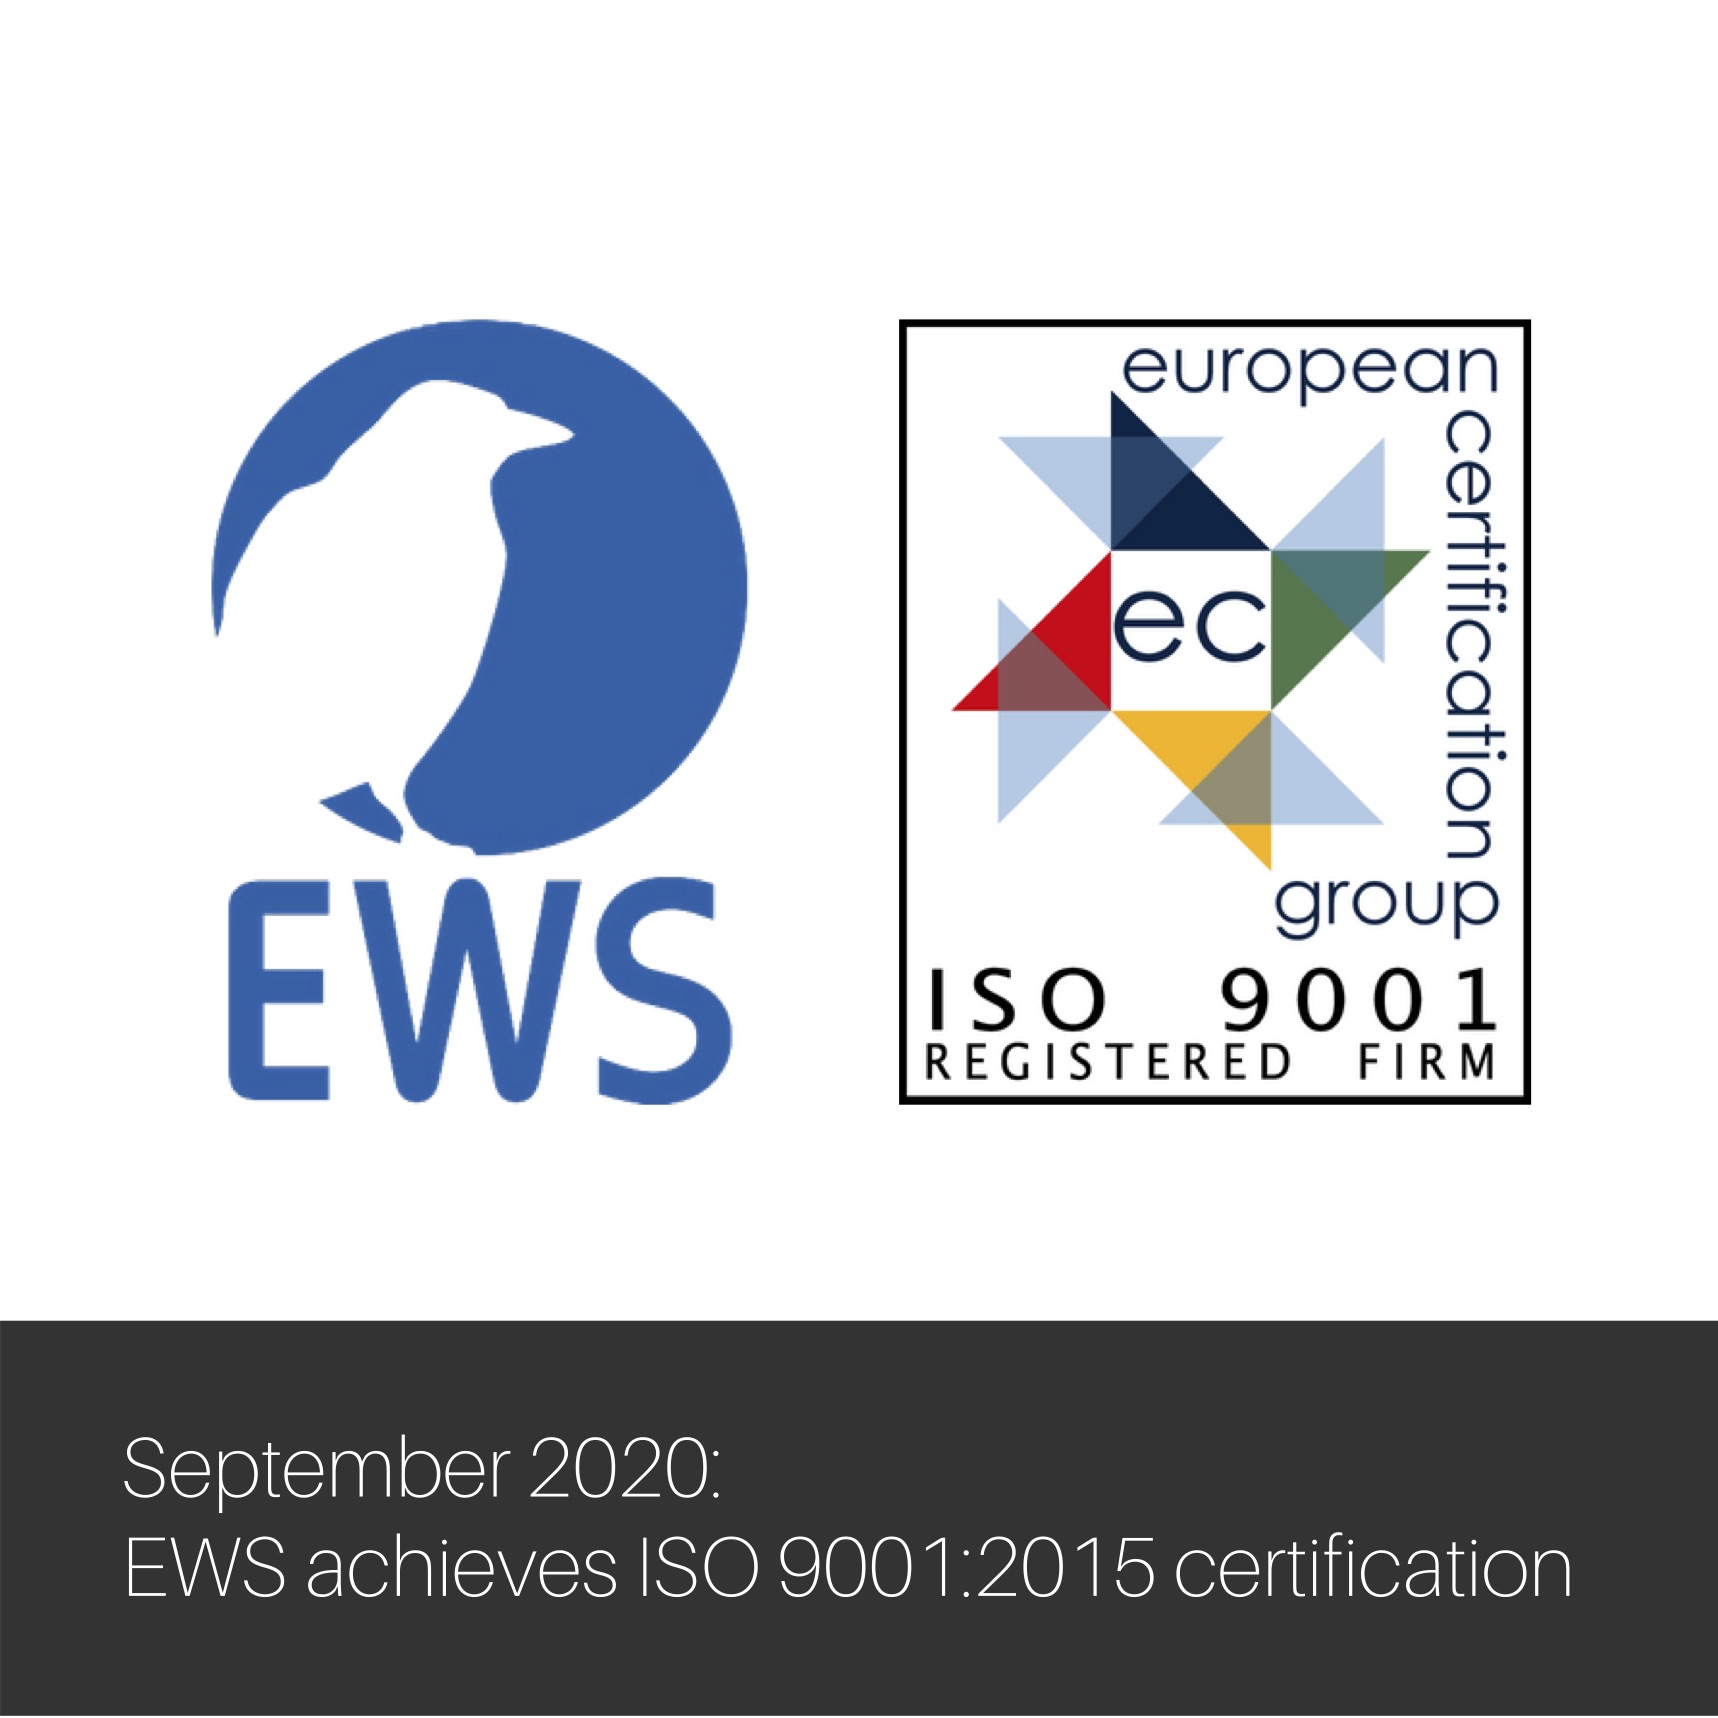 EWS achieves ISO 9001:2015 certification